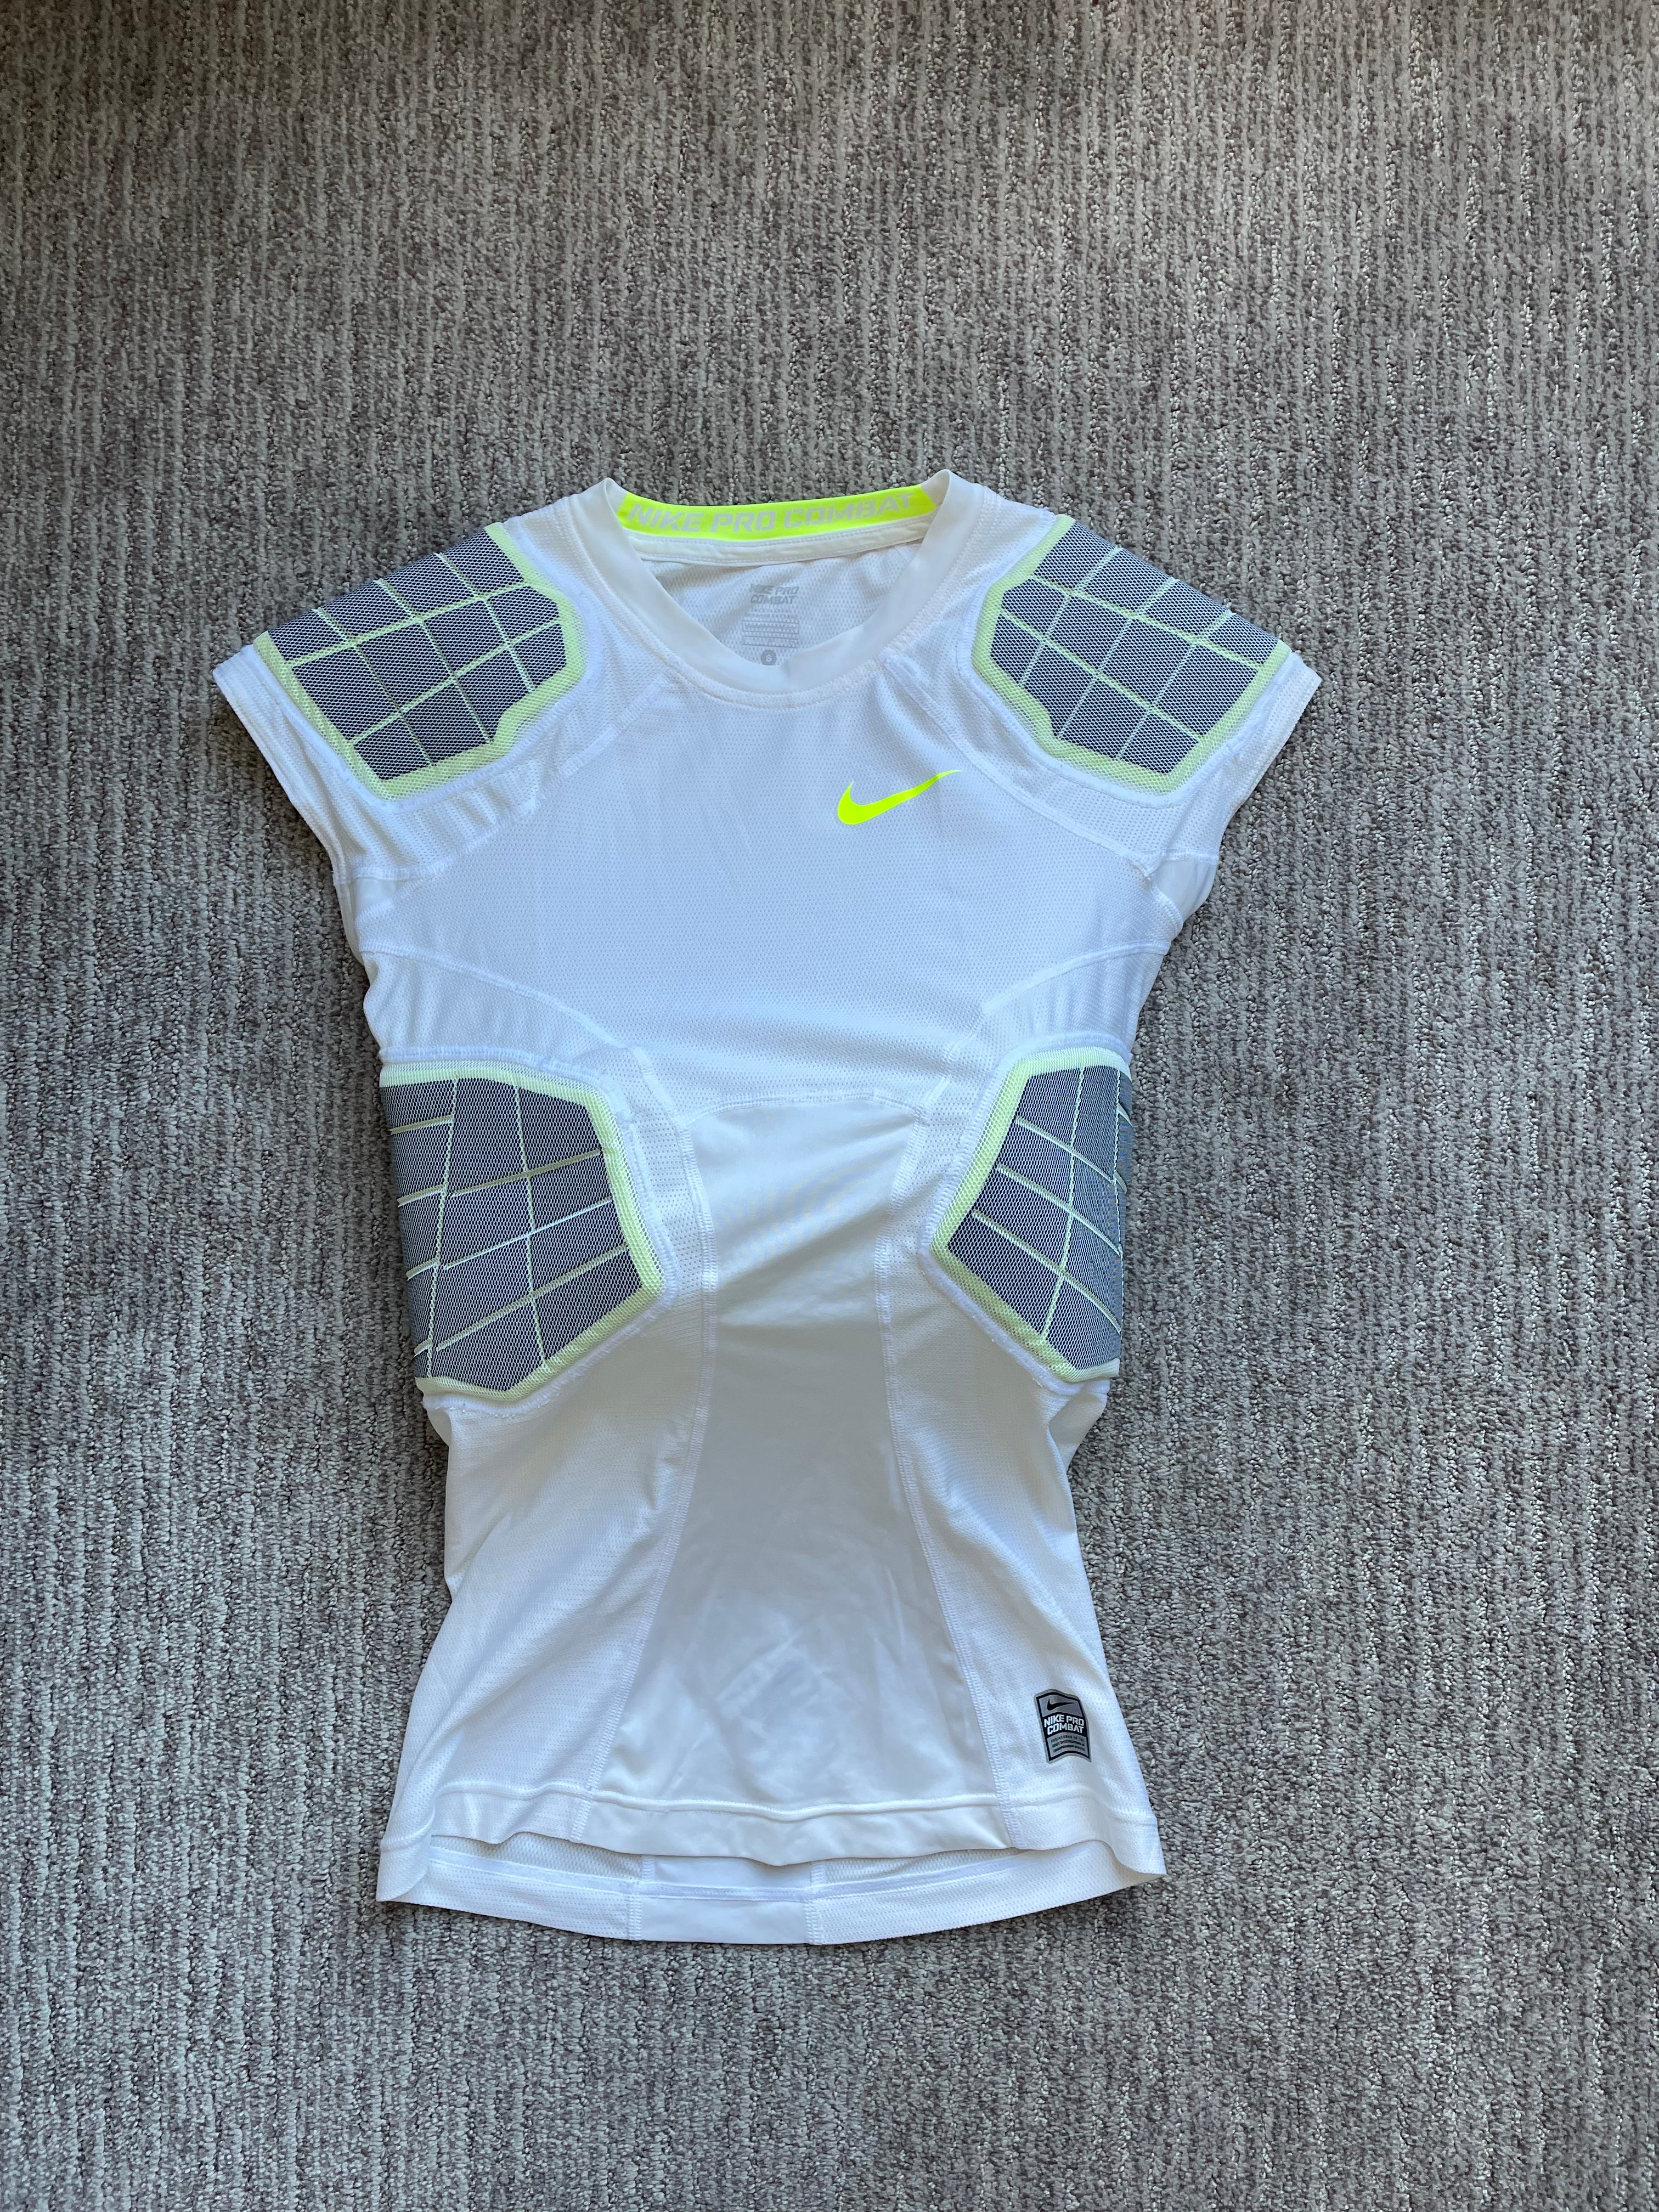 Men's Small Nike Pro Combat Hyperstrong Padded Dri Fit White Gray | SidelineSwap